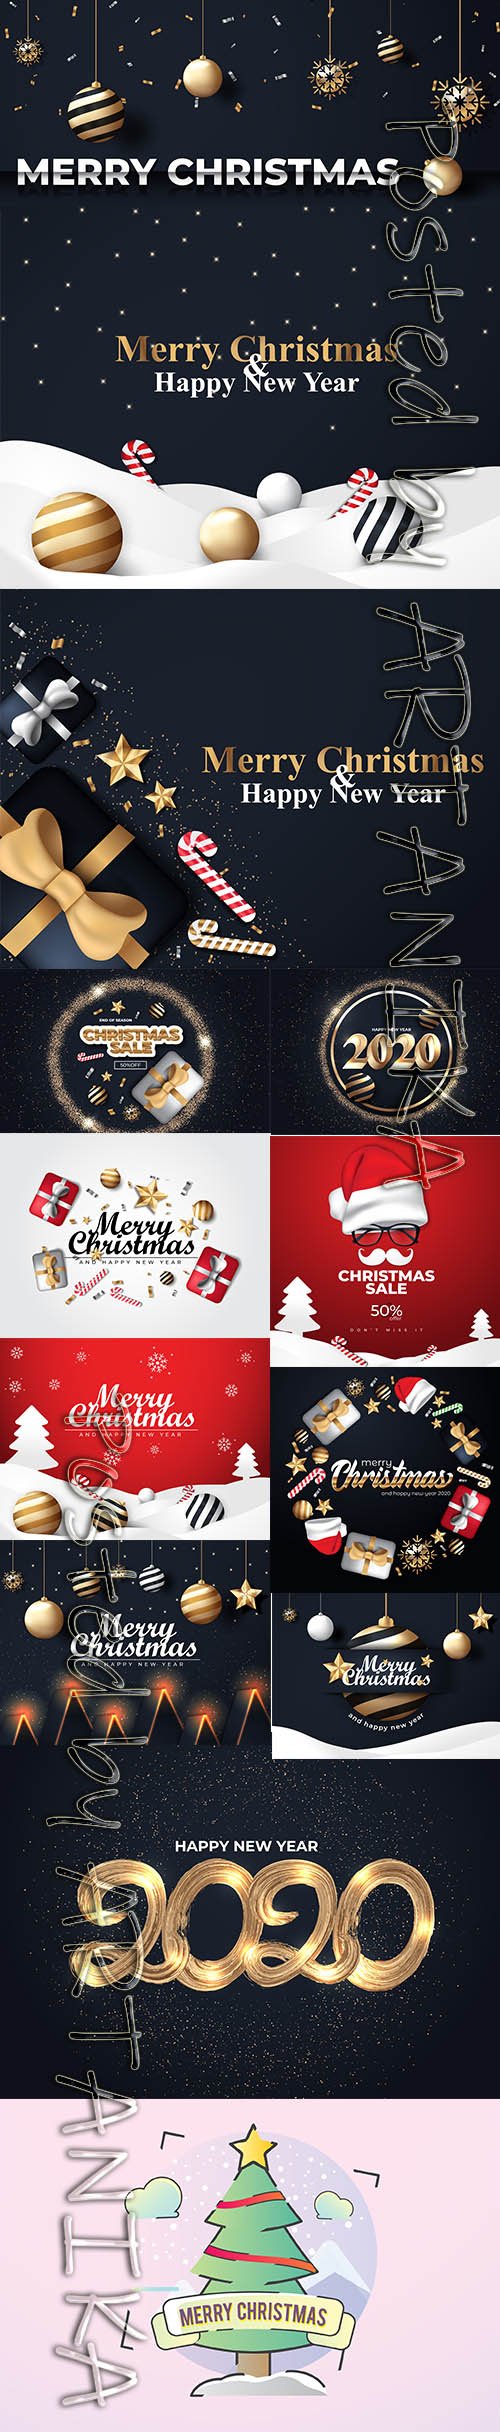 Merry Christmas and New Year 2020 Vector Illustrations Pack Vol 13